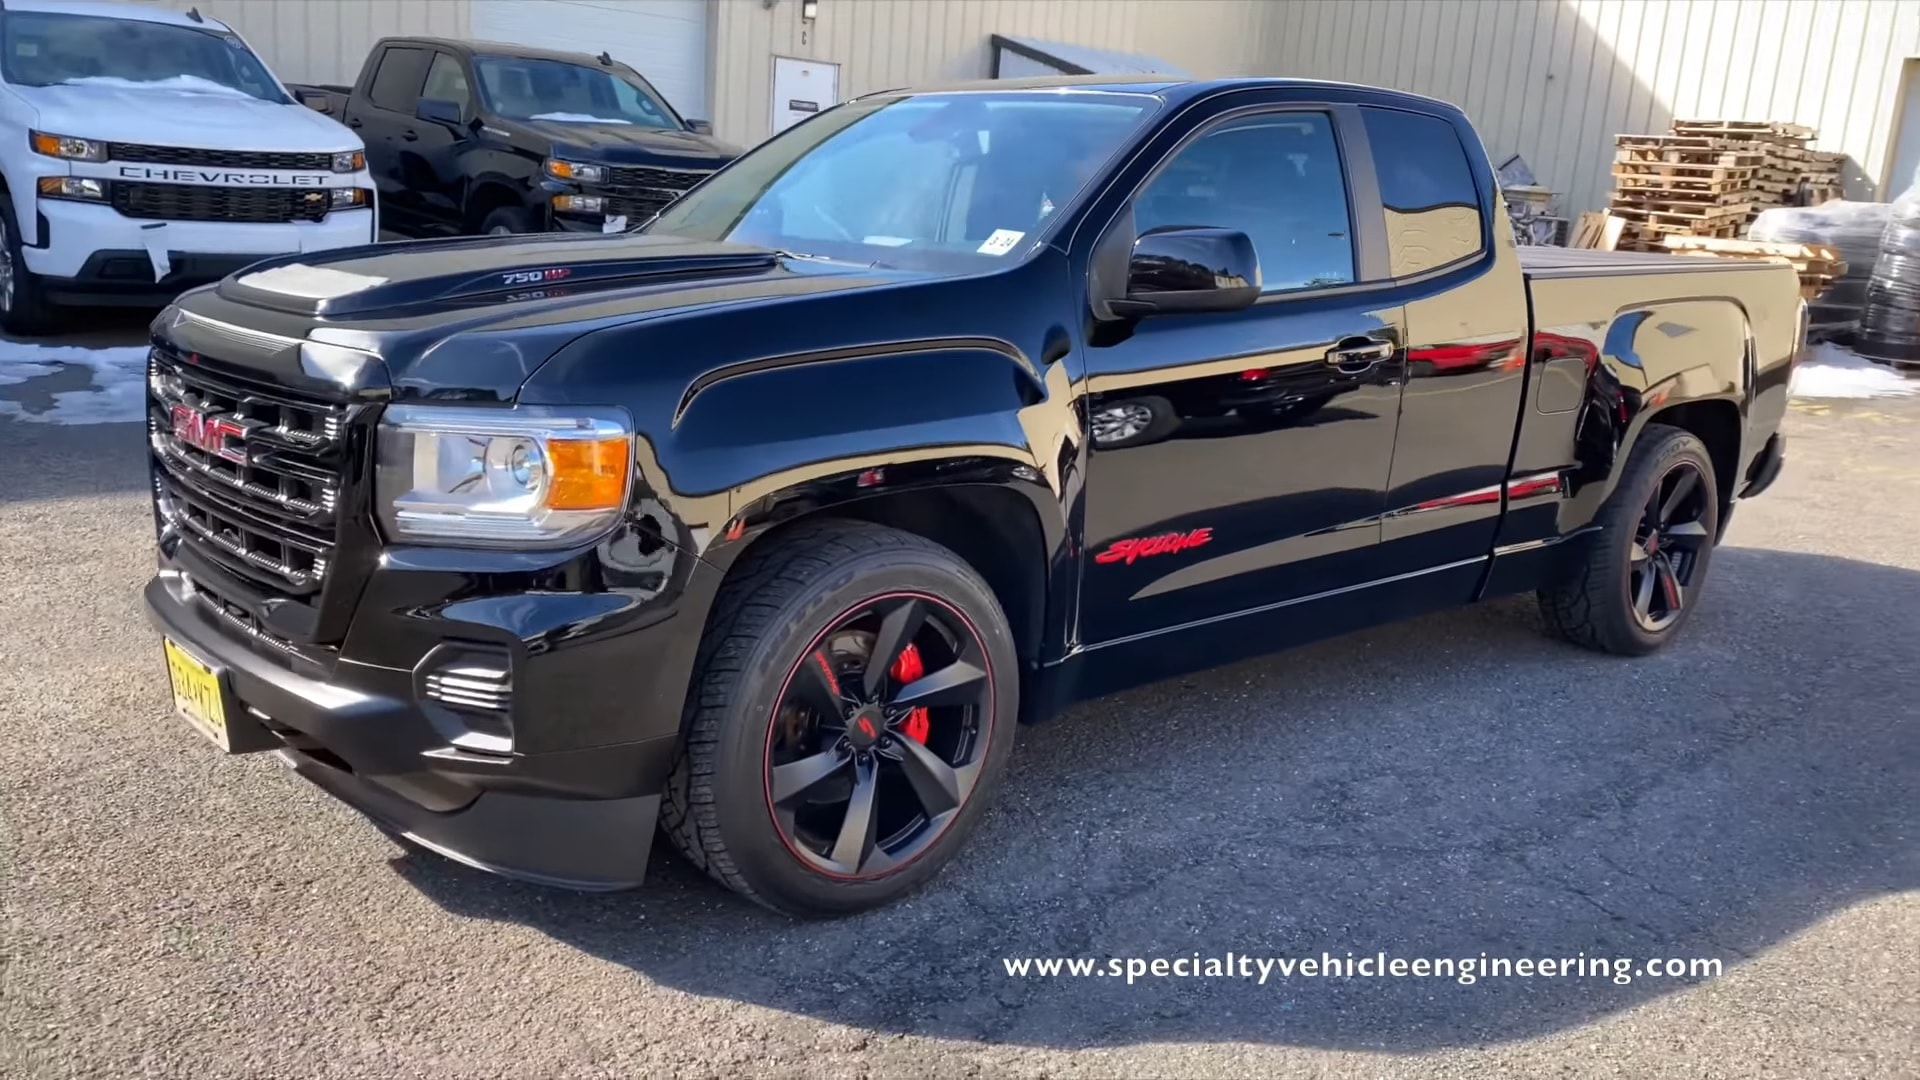 Specialty Vehicle Engineering 2022 GMC Syclone Rocks 750HP Supercharged V8 autoevolution